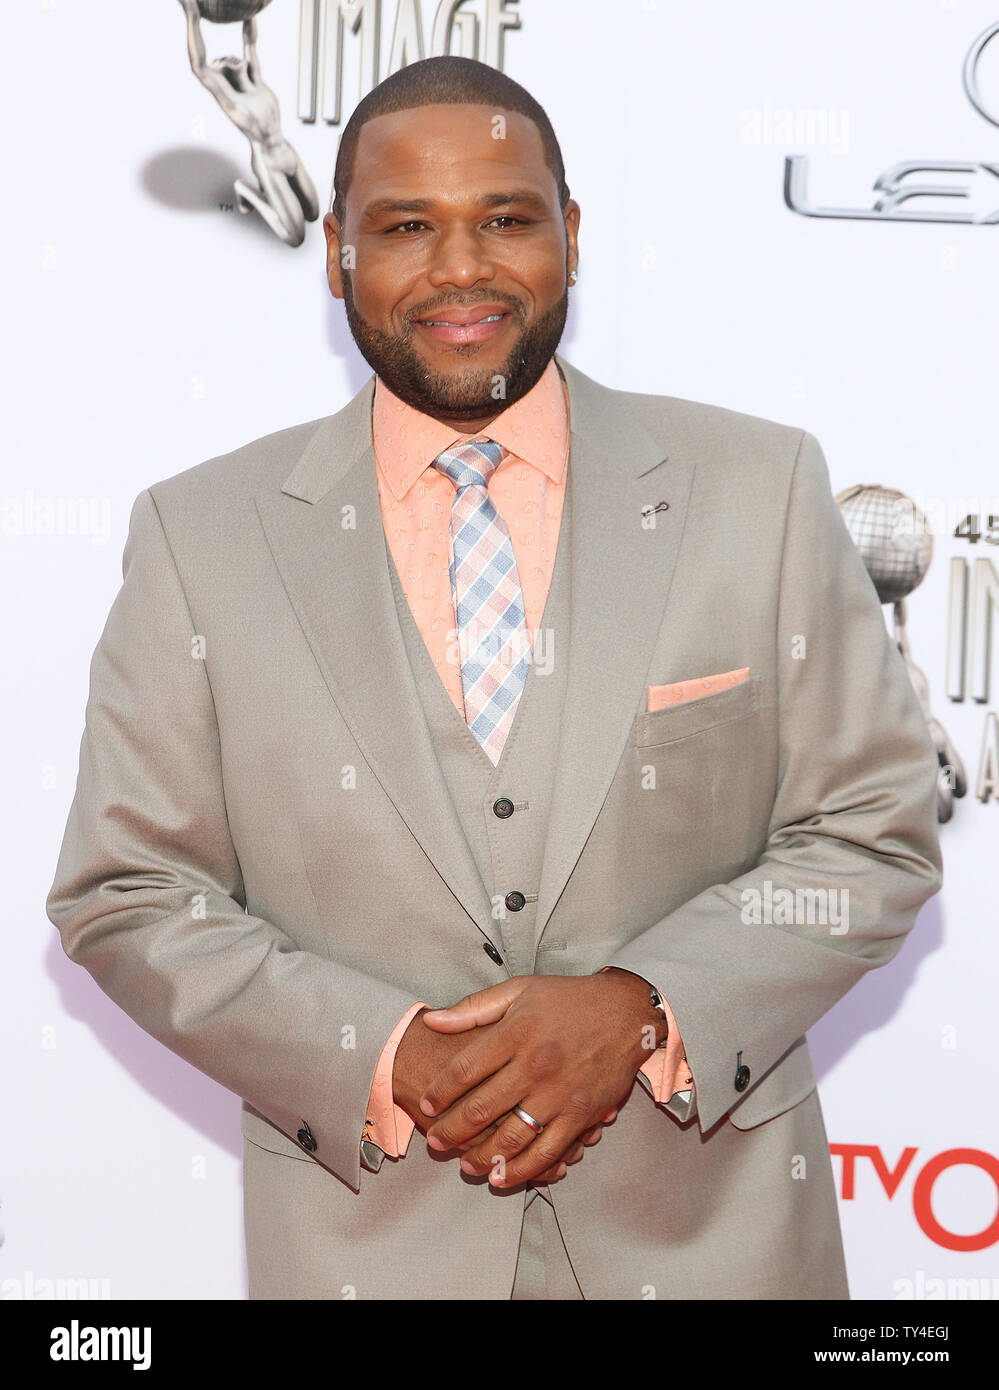 Actor Anthony Anderson arrives for the 45th NAACP Image Awards at the Pasadena Civic Auditorium in Pasadena, California on February 22, 2014. The NAACP Image Awards celebrates the accomplishments of people of color in the fields of television, music, literature and film and also honors individuals or groups who promote social justice through creative endeavors.   UPI/Ken Matsui Stock Photo